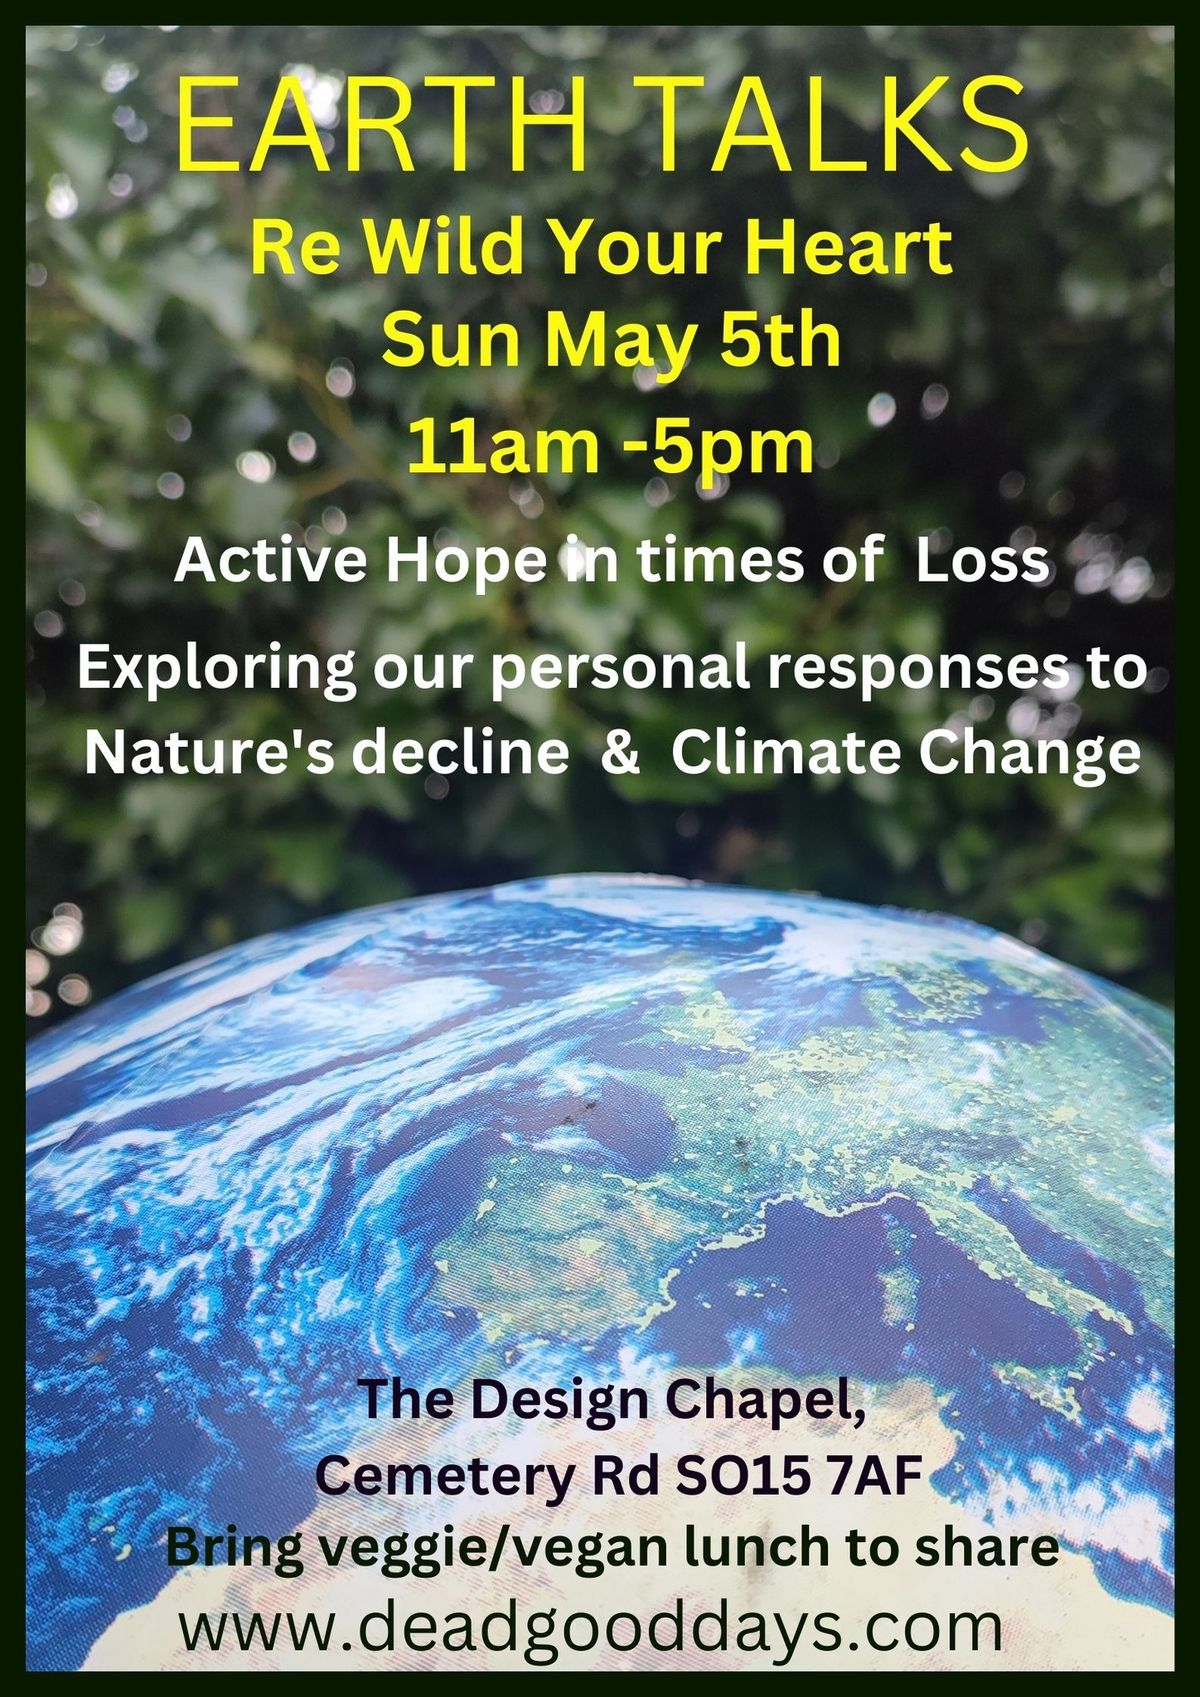 Earth Talks - a Workshop to ReWild your Heart